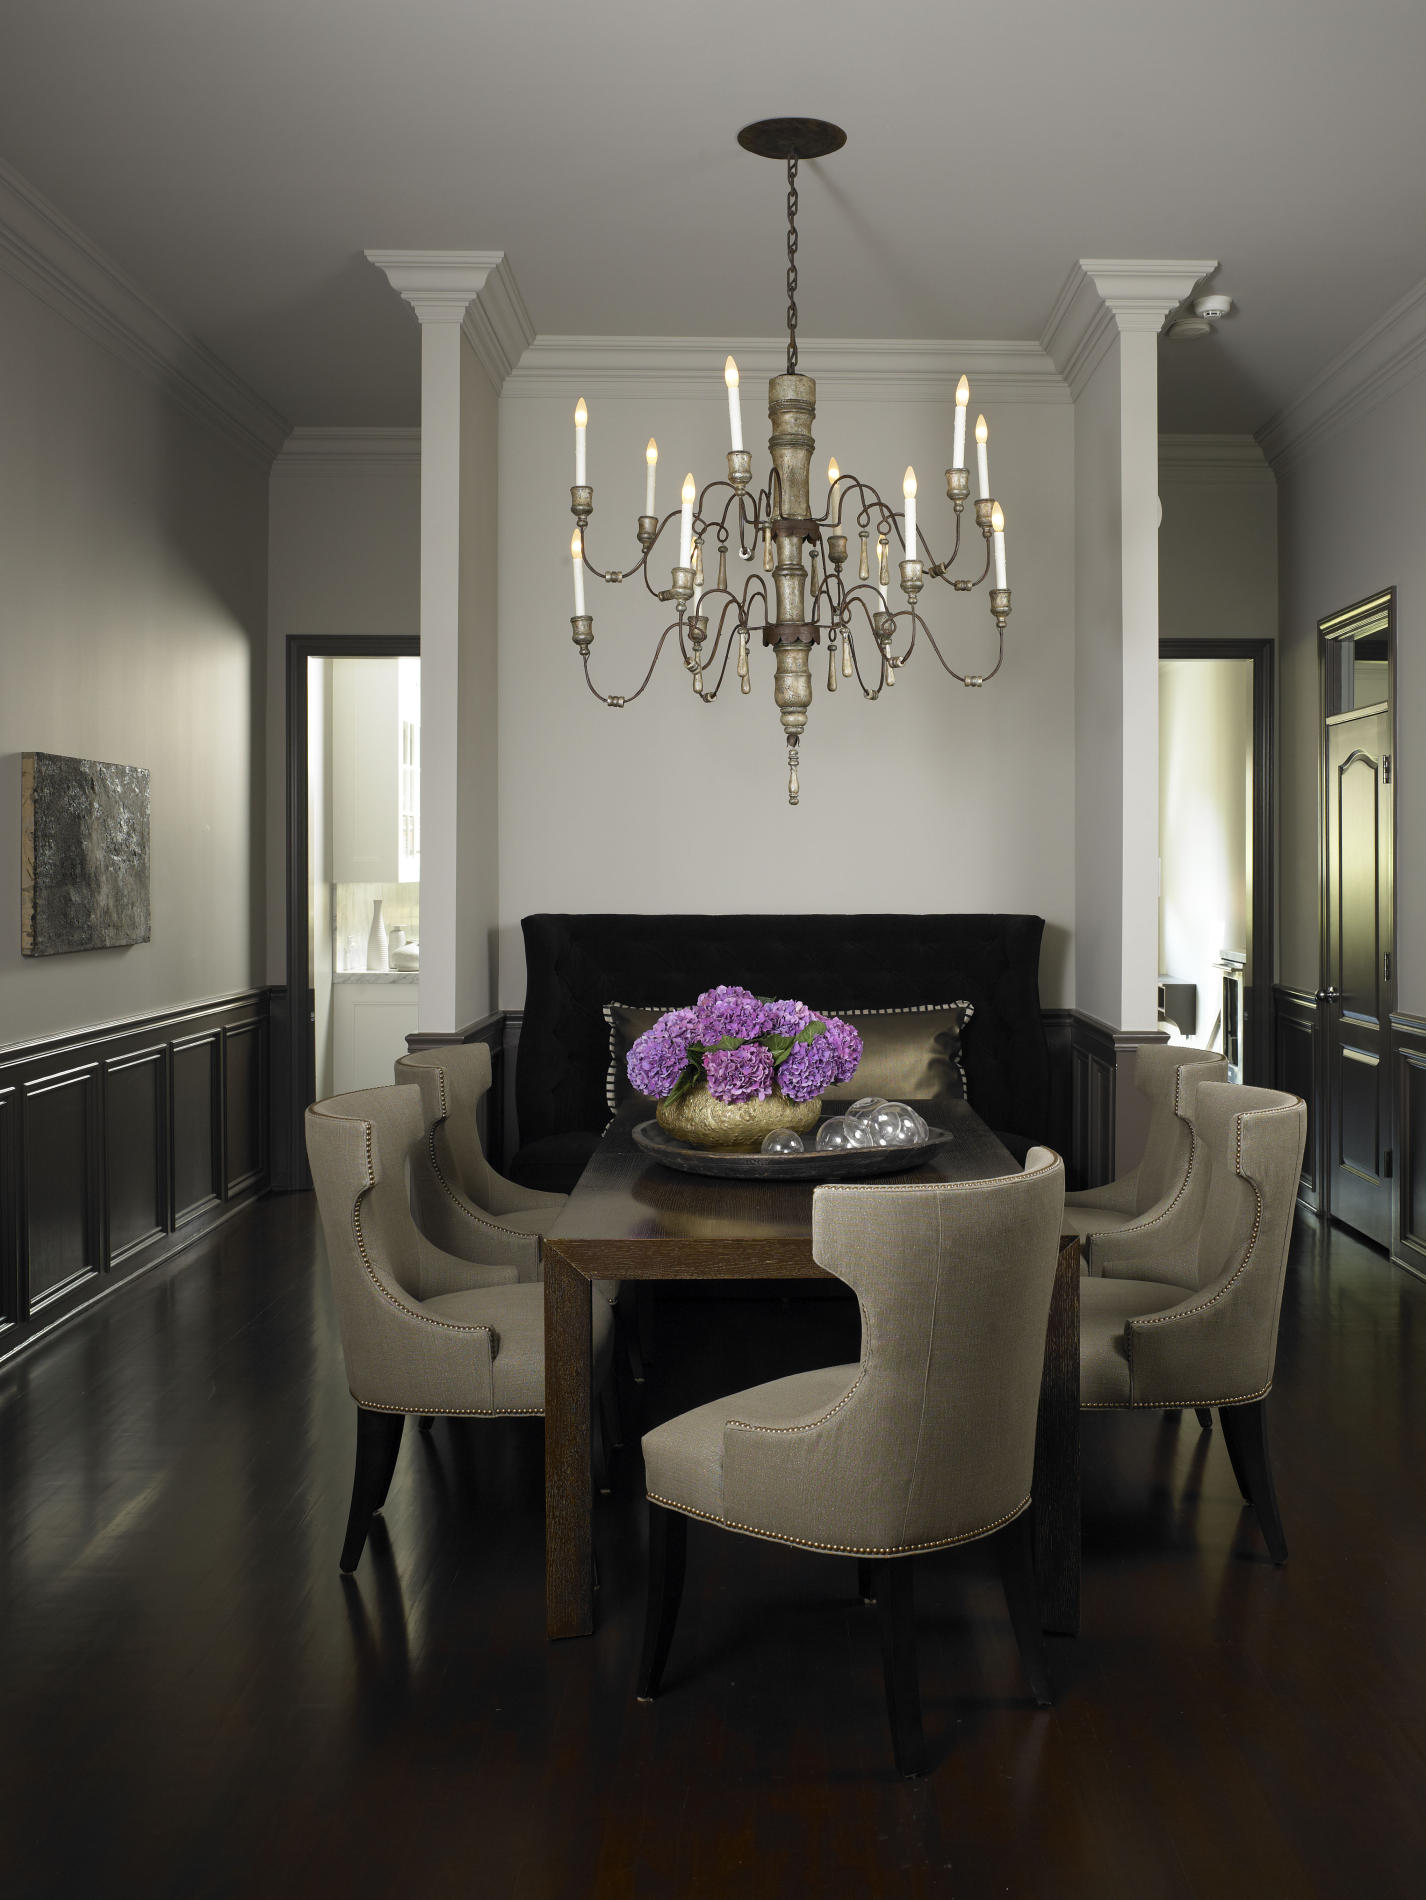 Hanging Lamp Room Classic Hanging Lamp In Dining Room Chandeliers With Casual Table On Dark Floor Dining Room Dining Room Chandeliers That You Can Apply